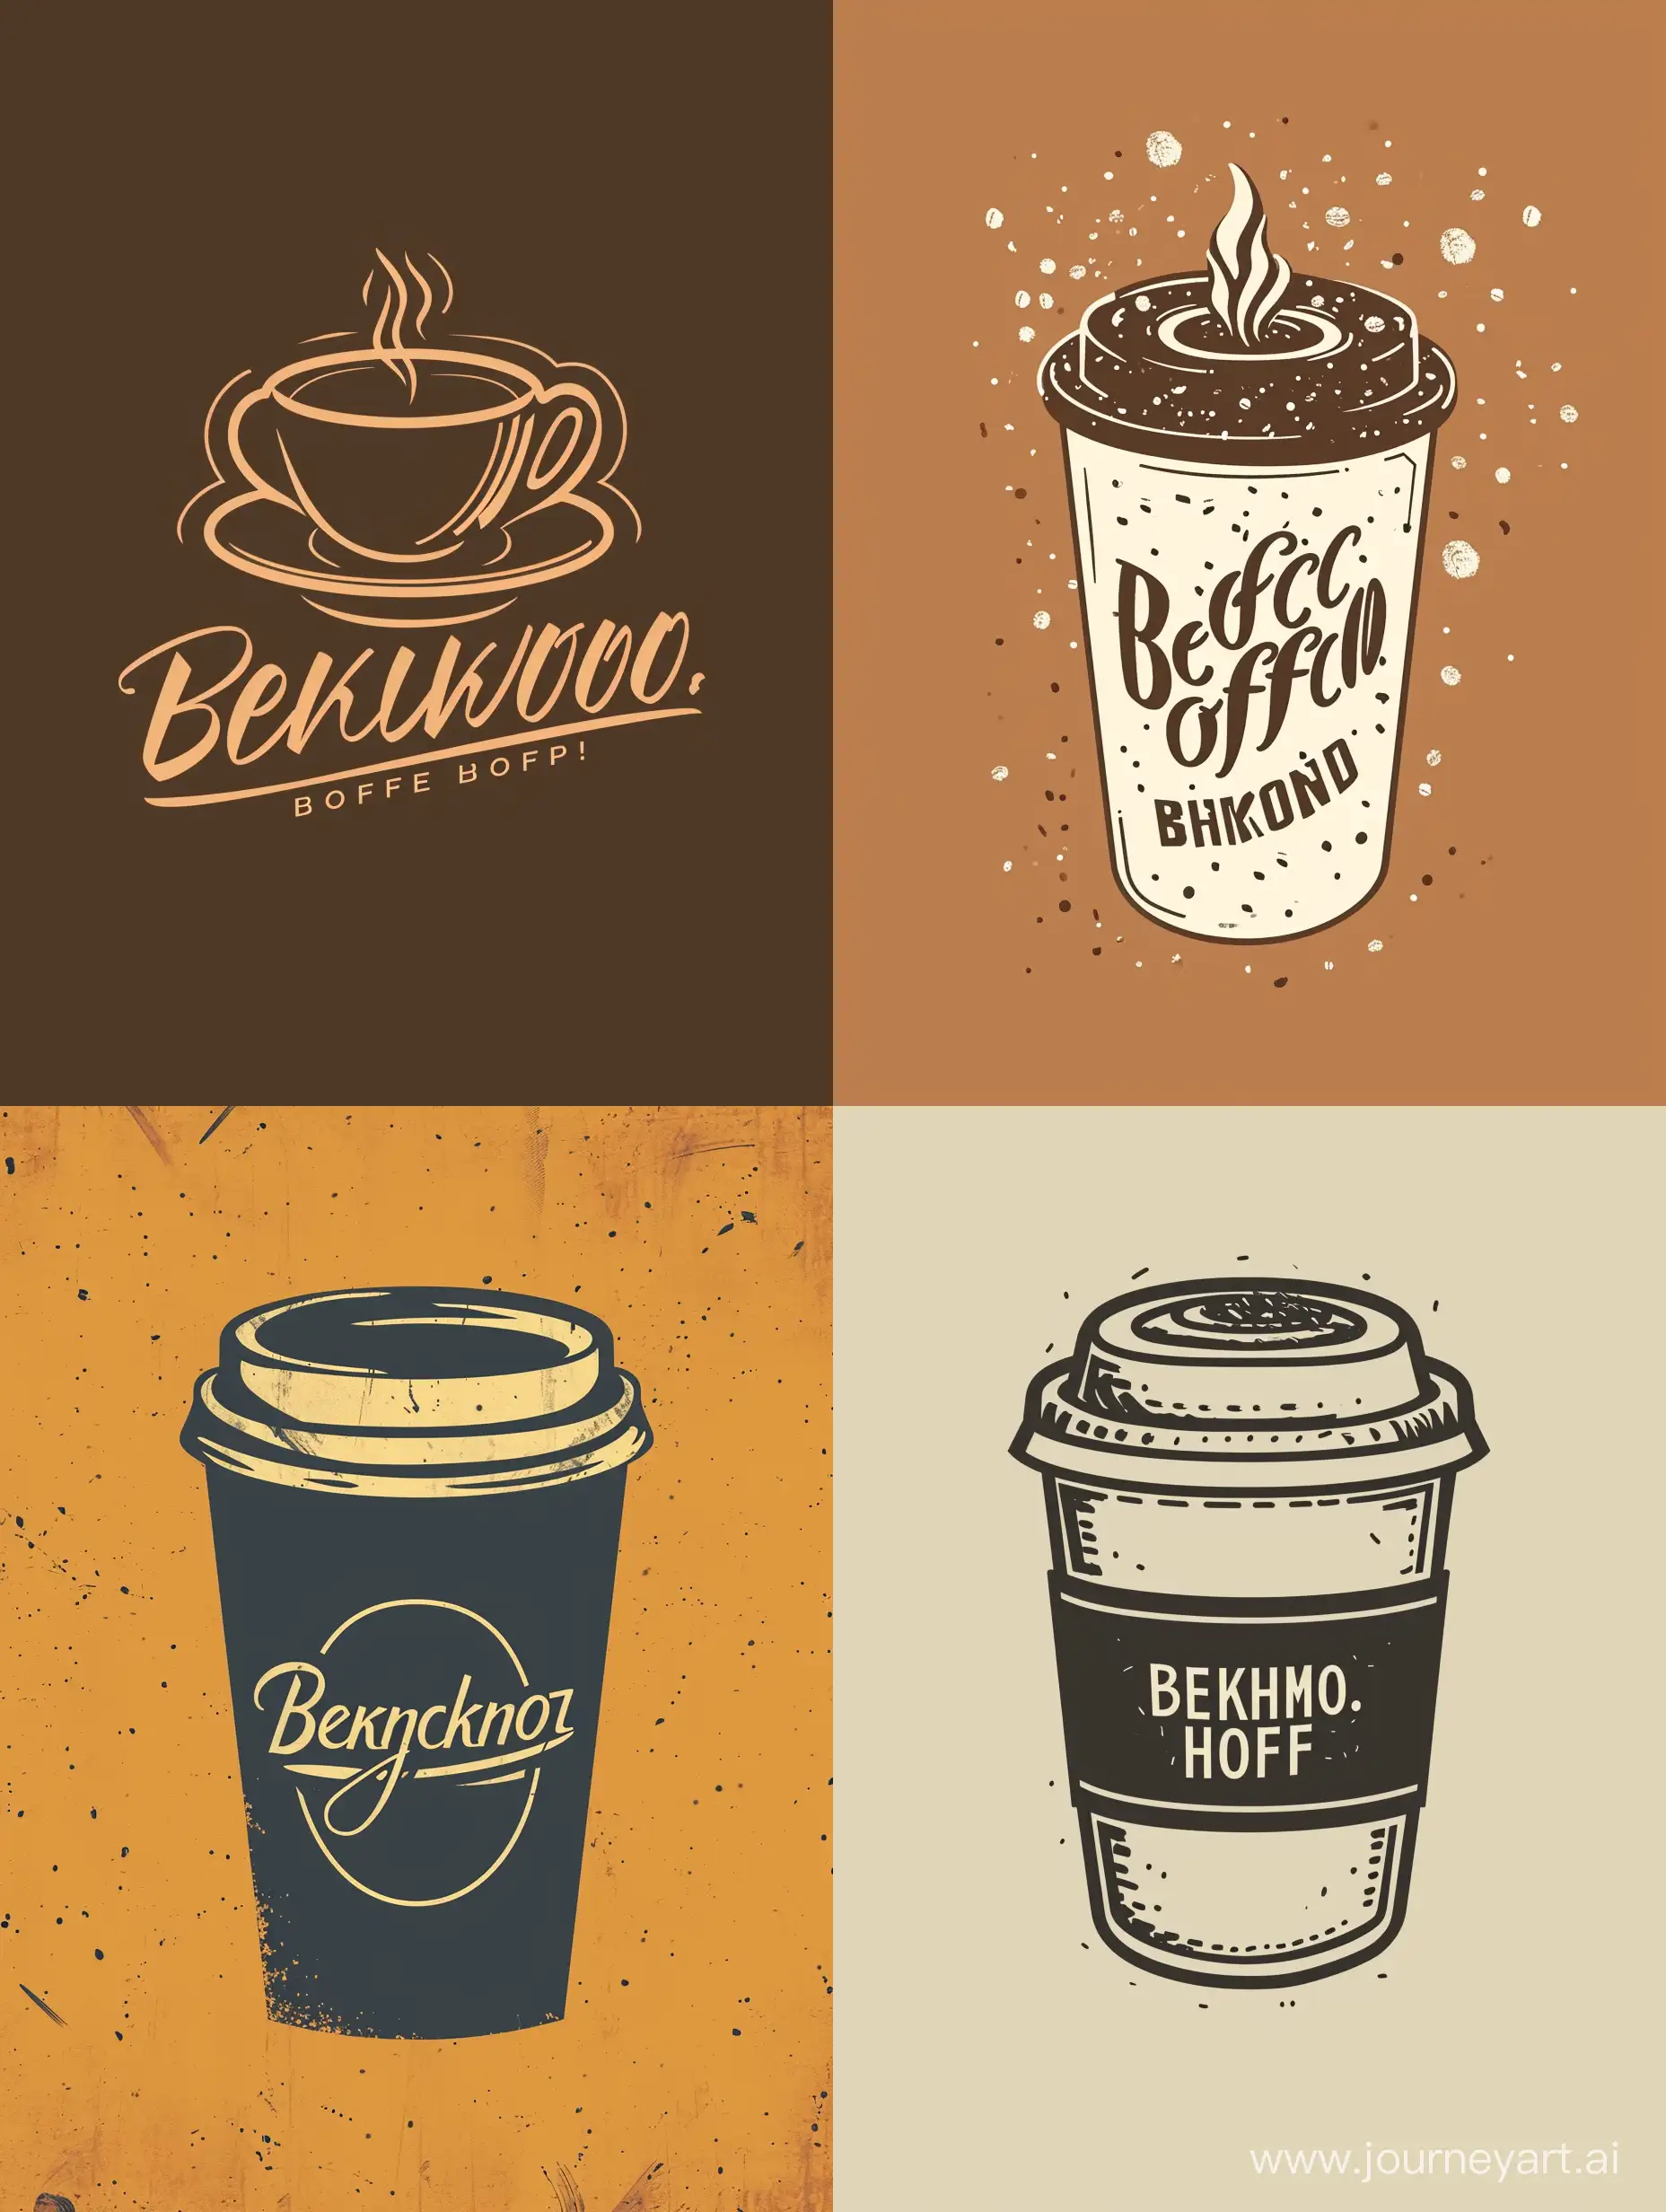 Beckhams-Coffee-Shop-Logo-with-Unique-Design-Vibrant-Visual-Appeal